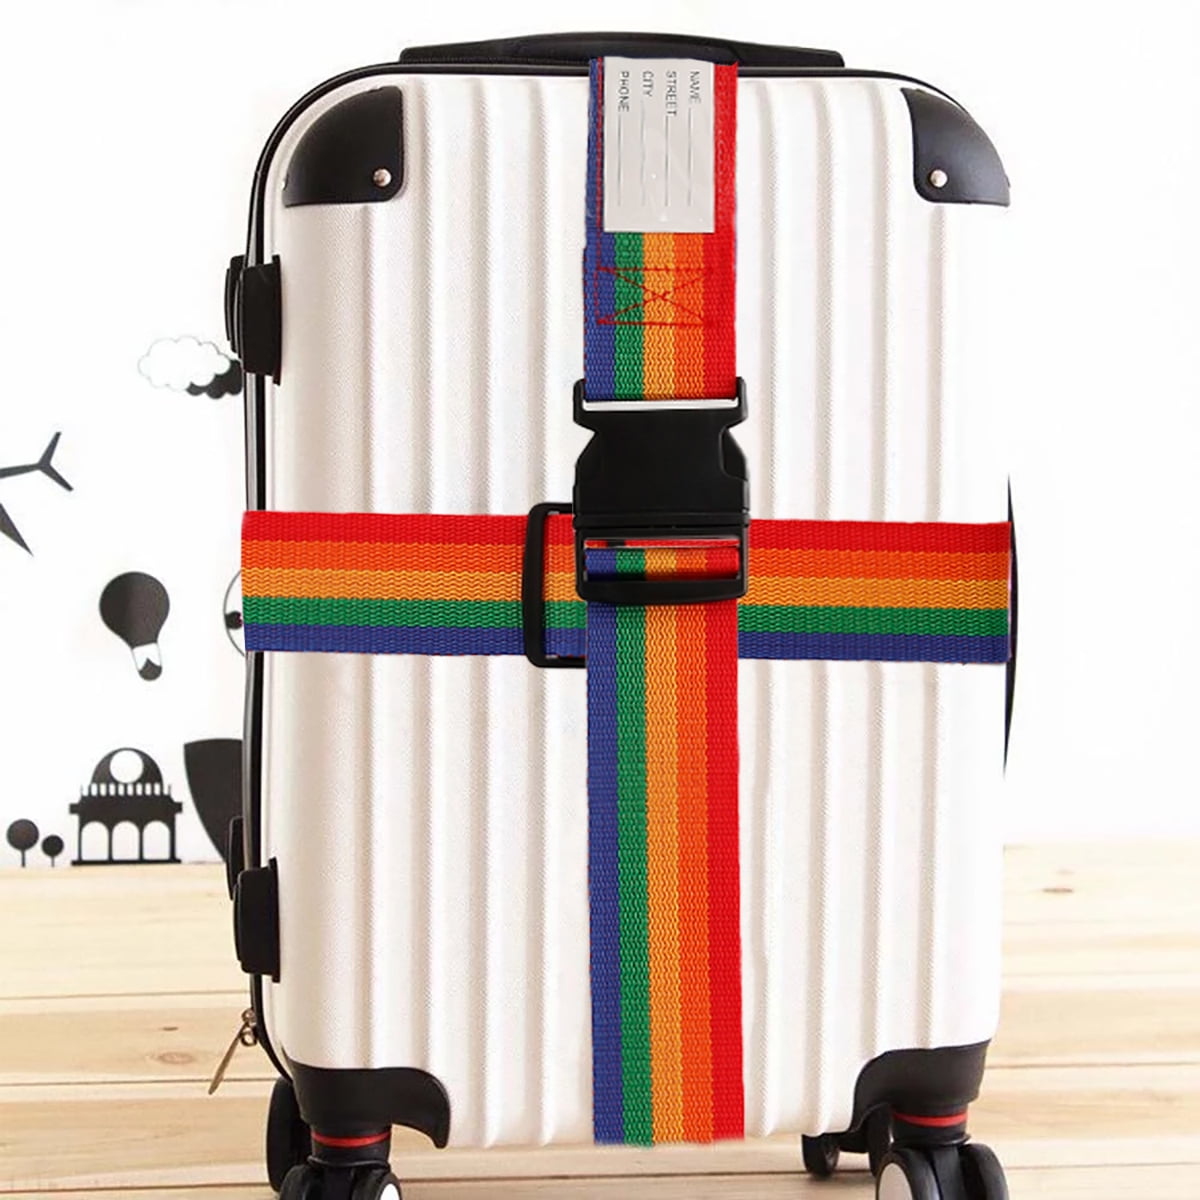 ToWinle 2 Pack Suitcase Travel Belt Colorful Rainbow Design with Lock Suitcase Quick Release Buckle Luggage Straps